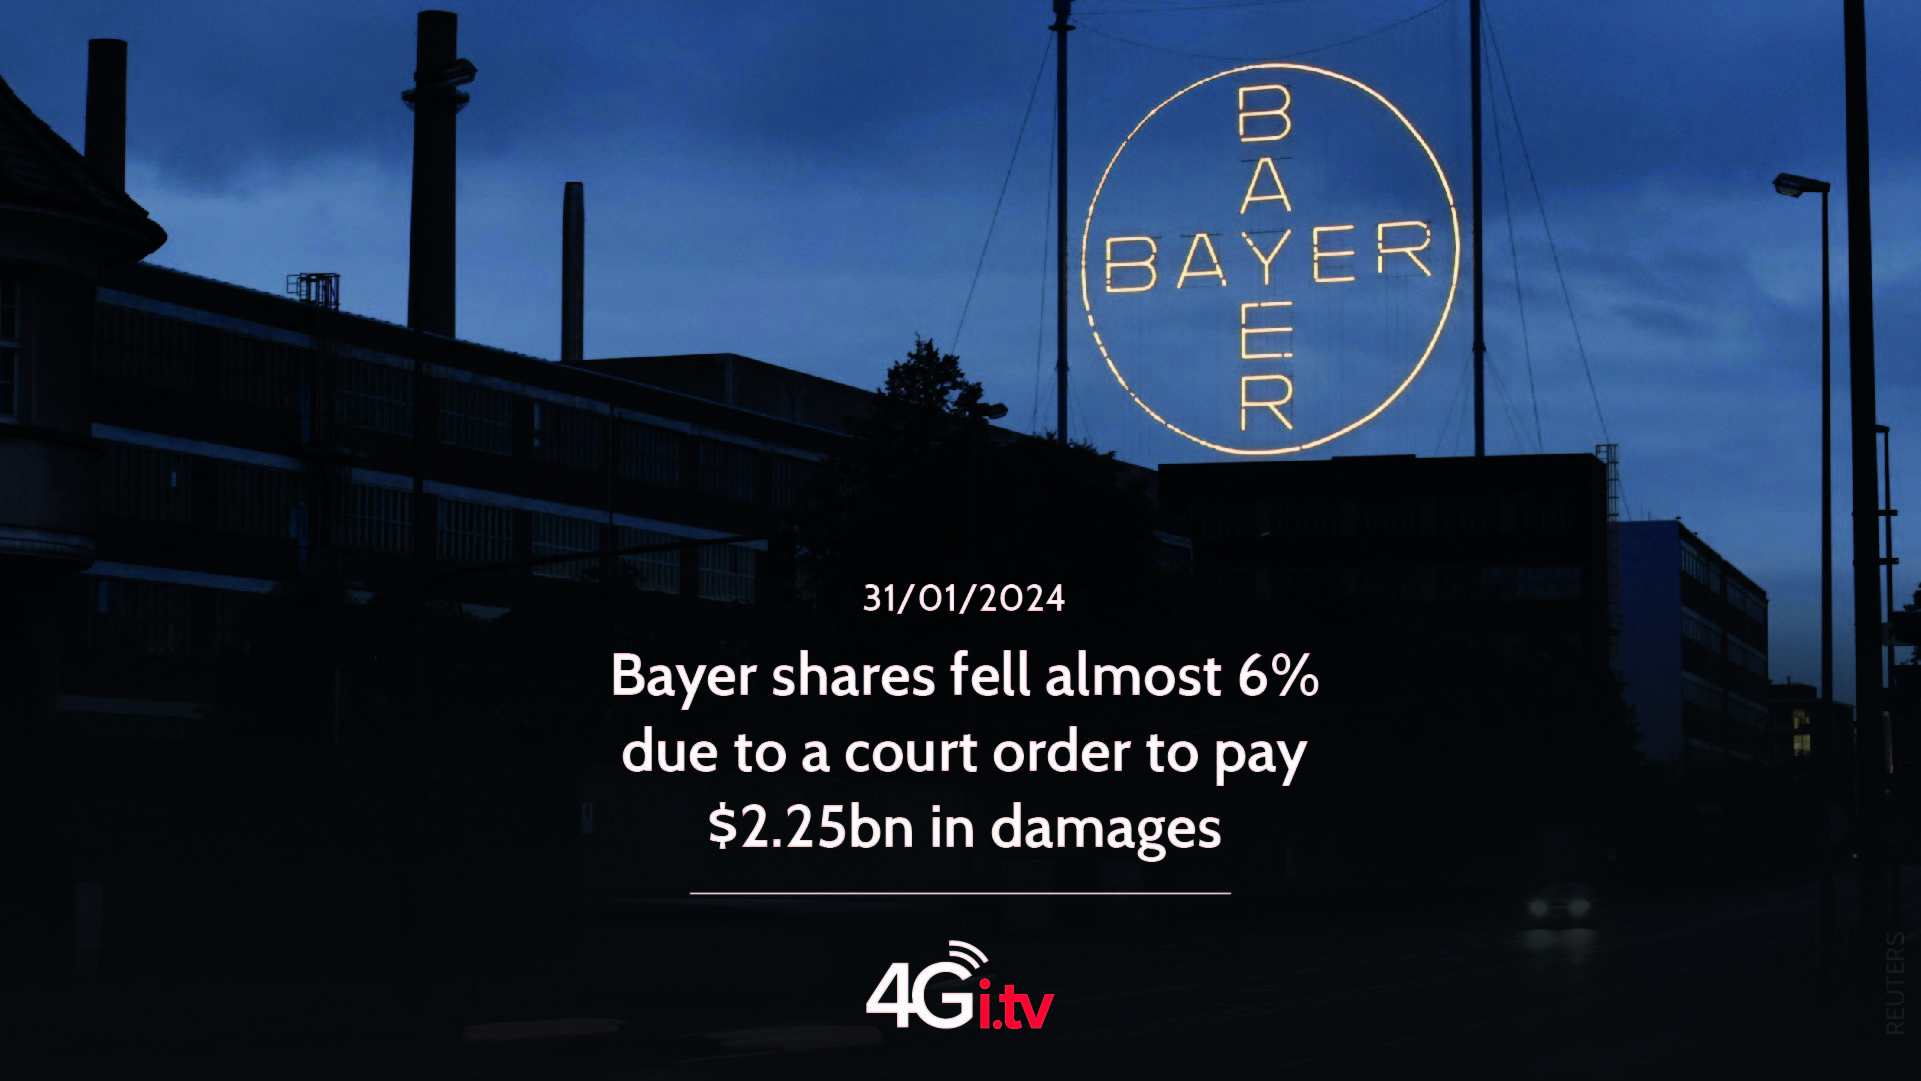 Подробнее о статье Bayer shares fell almost 6% due to a court order to pay $2.25bn in damages